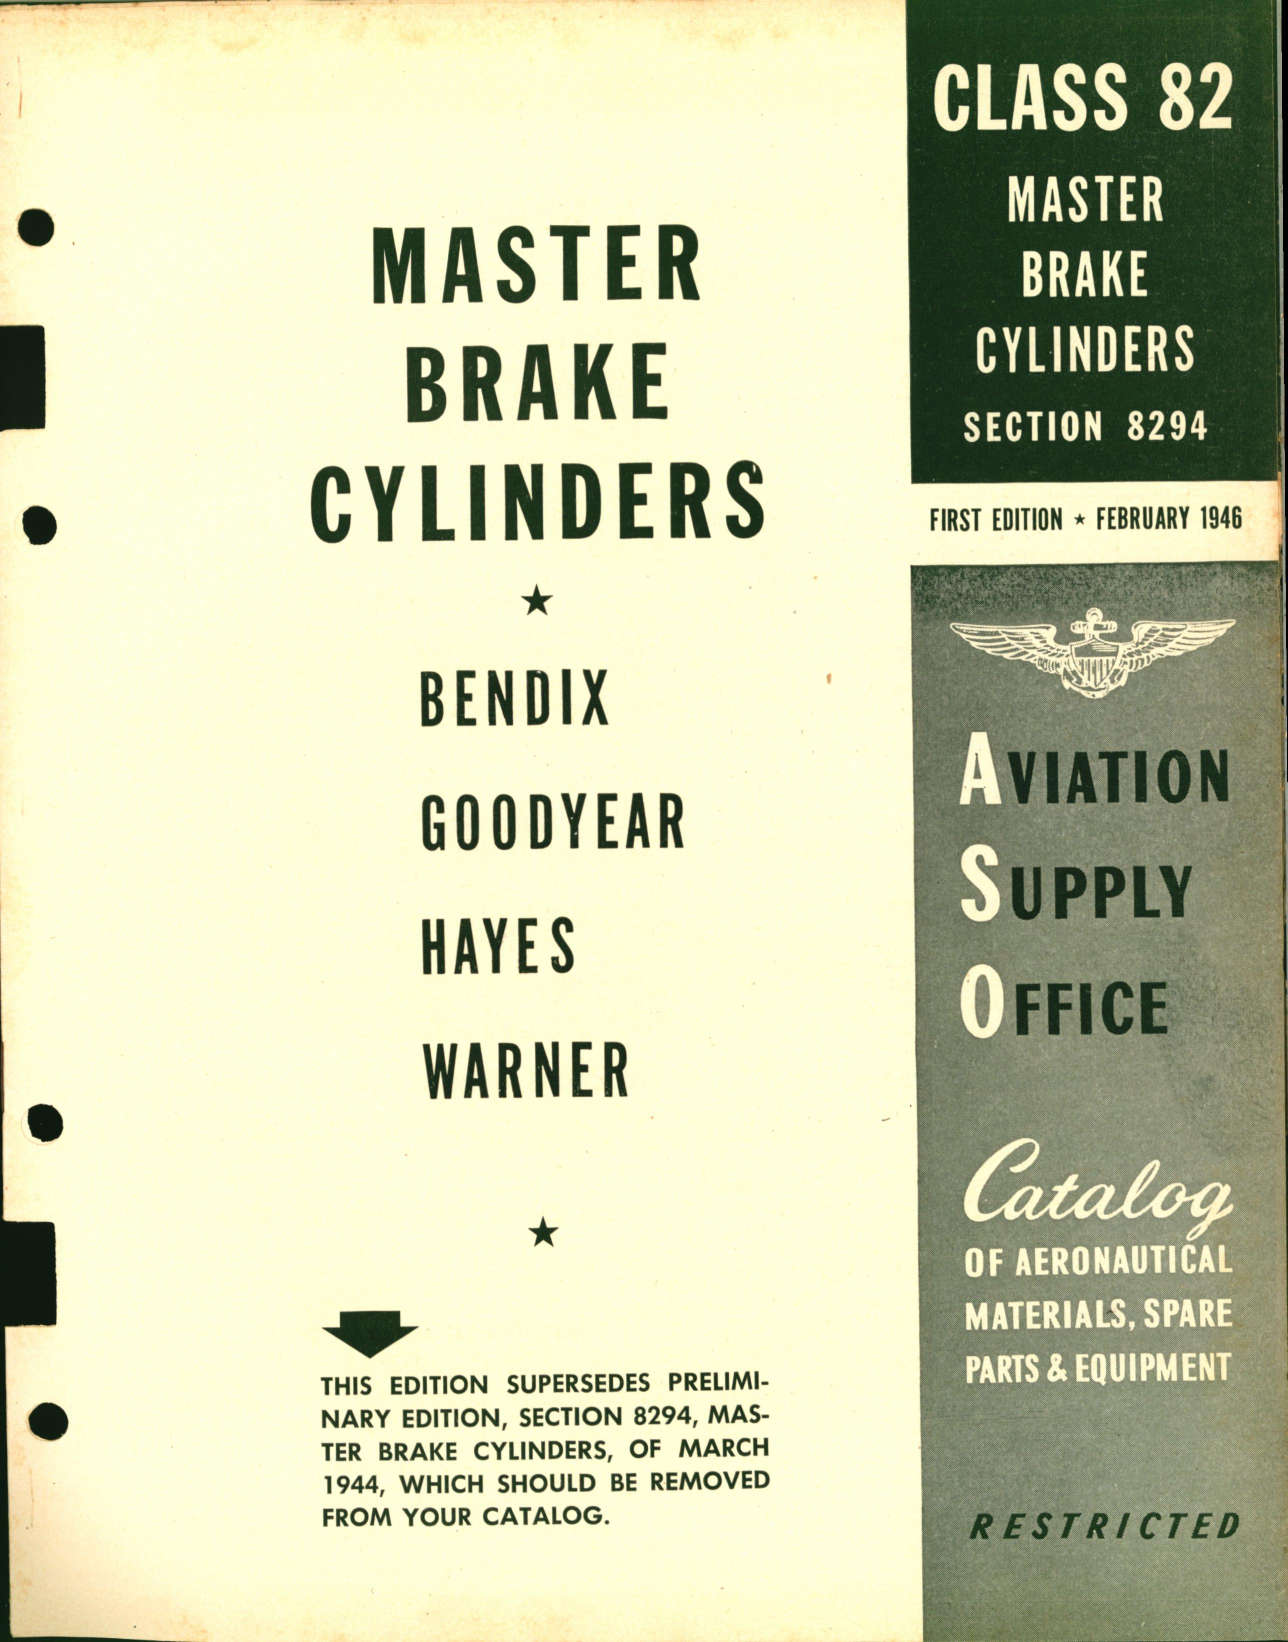 Sample page 1 from AirCorps Library document: Master Brake Cylinders for Bendix, Goodyear, Hayes, Warner